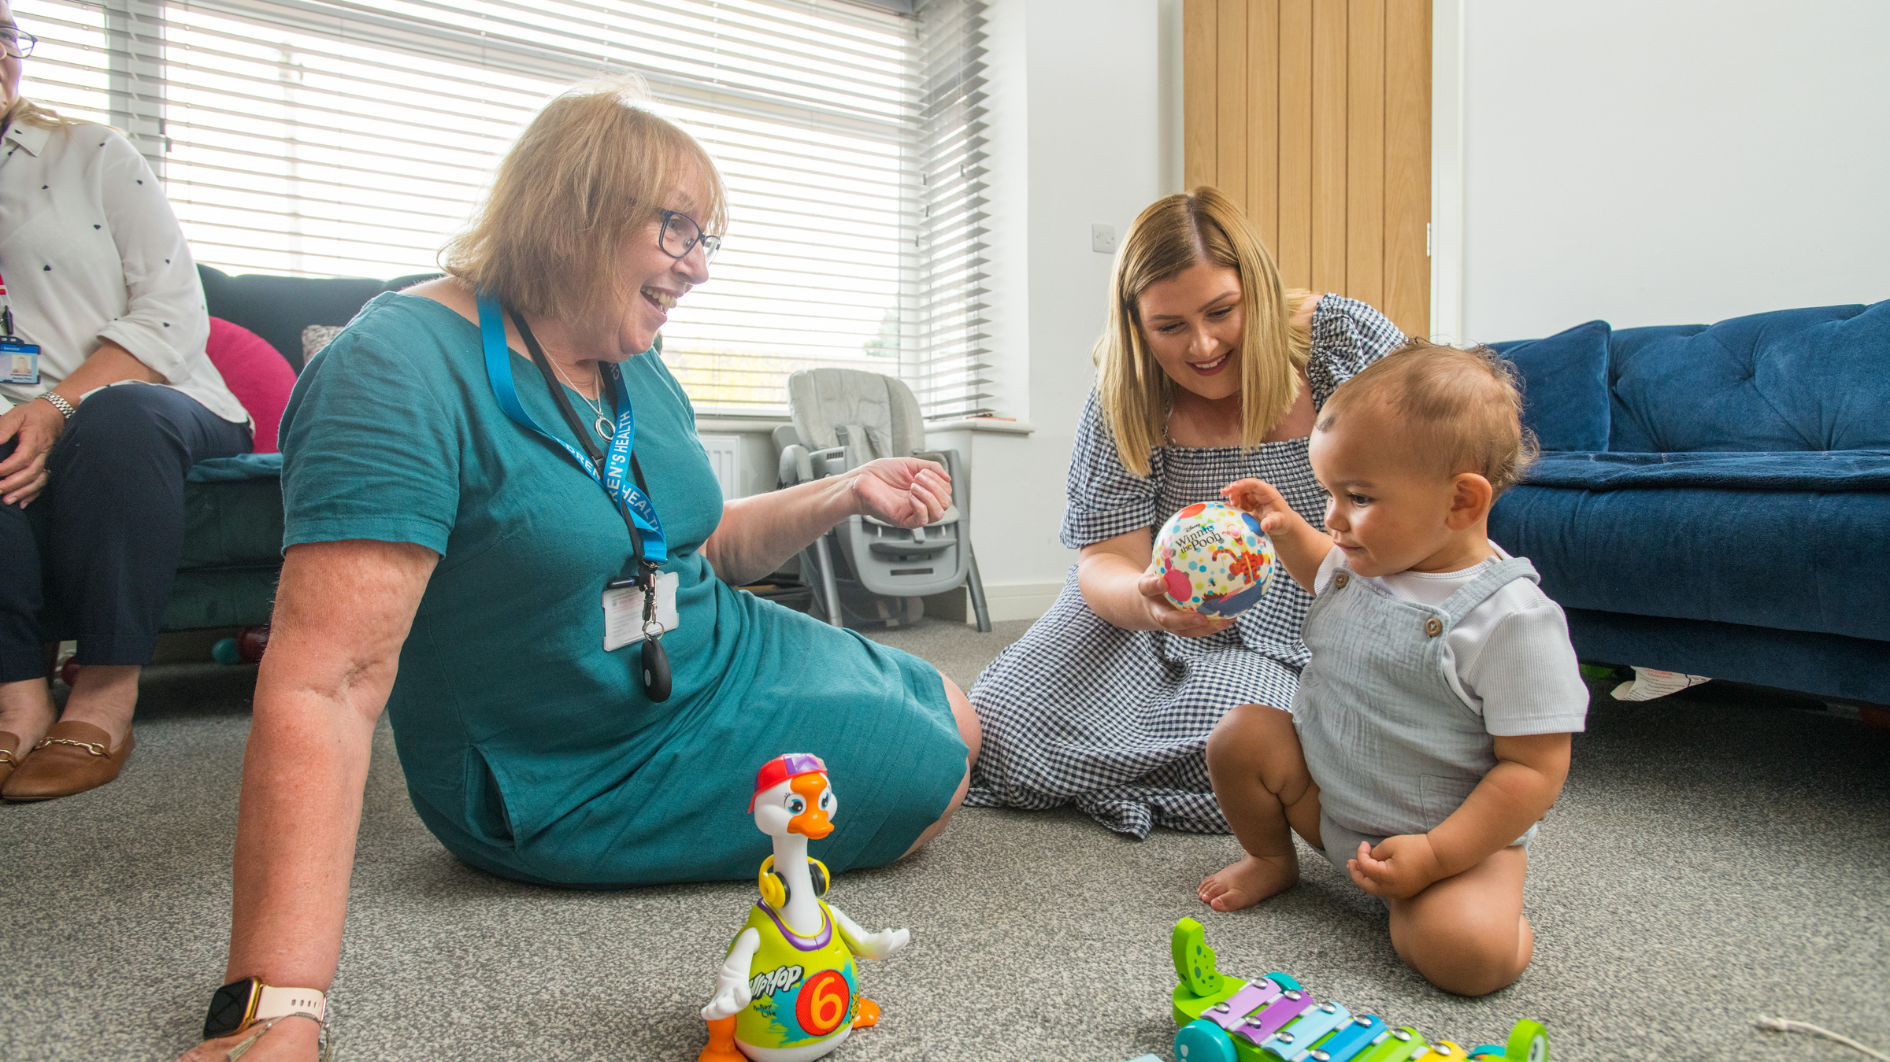 Health visitor sat with mum and child in a living room